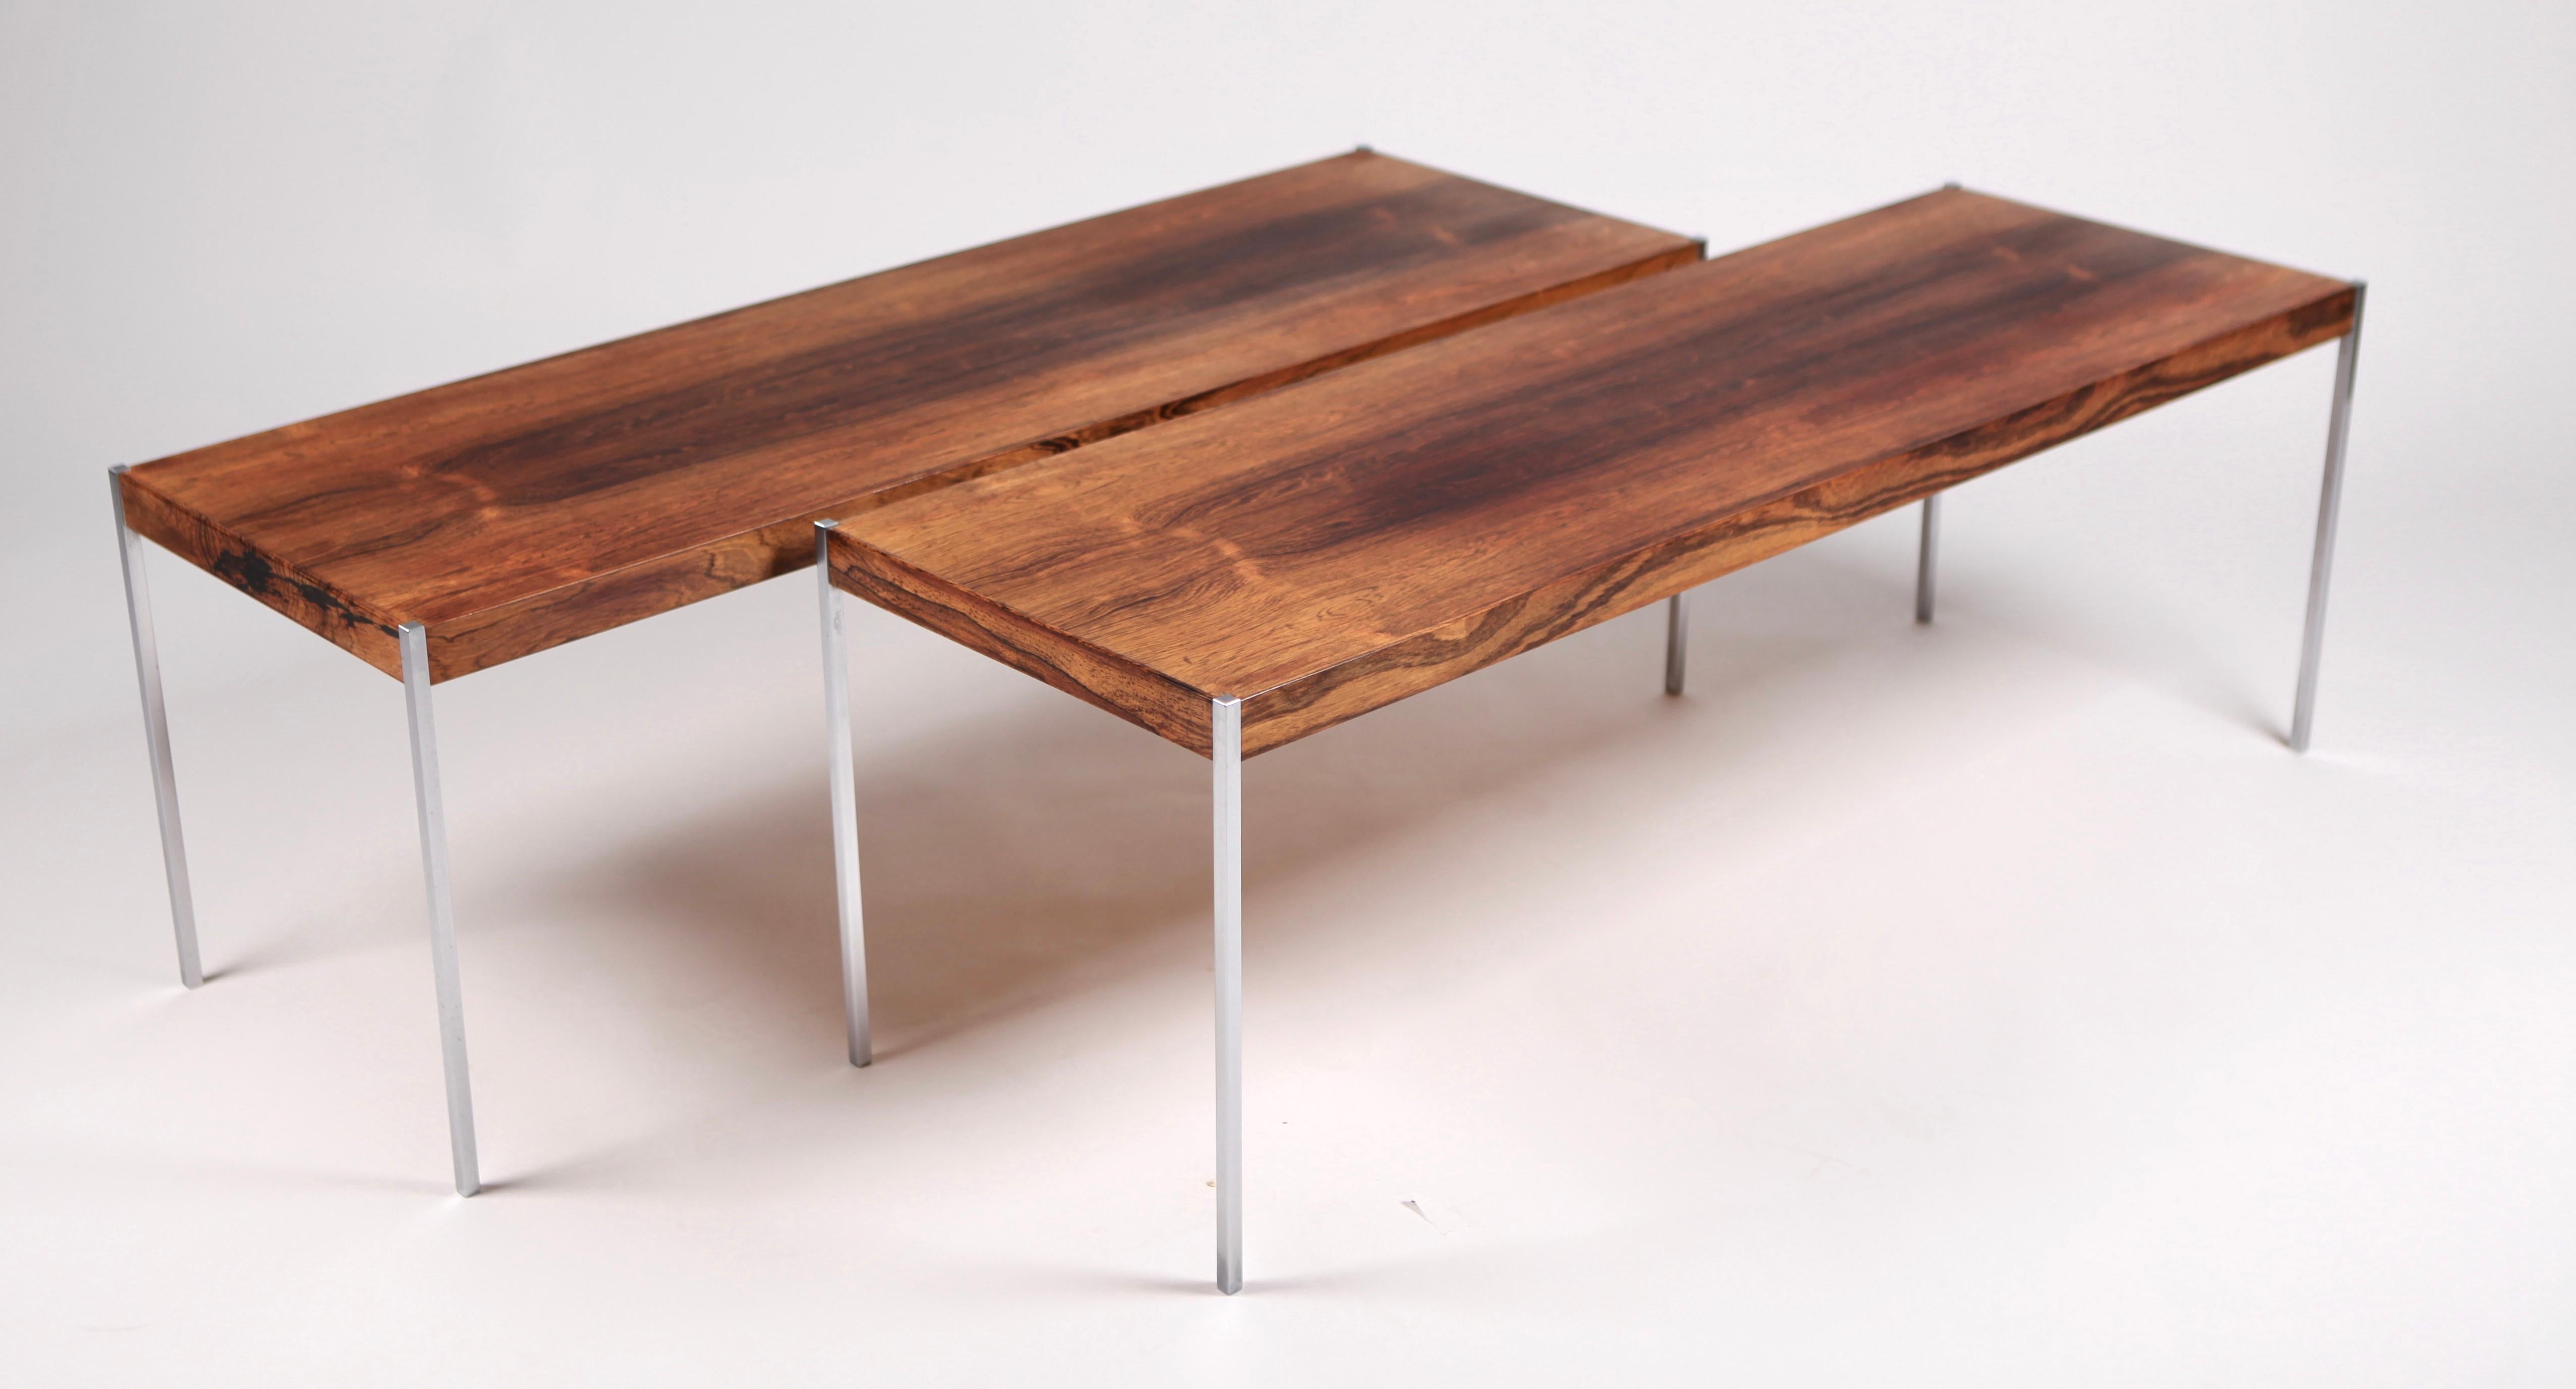 Pair of side or coffee-tables designed by Uno & Östen Kristiansson for Luxus, Sweden 1960s.
Executed in Rosewood and brushed steel.
L: 120 cm 
D: 40 cm
H: 40cm 
each table
    